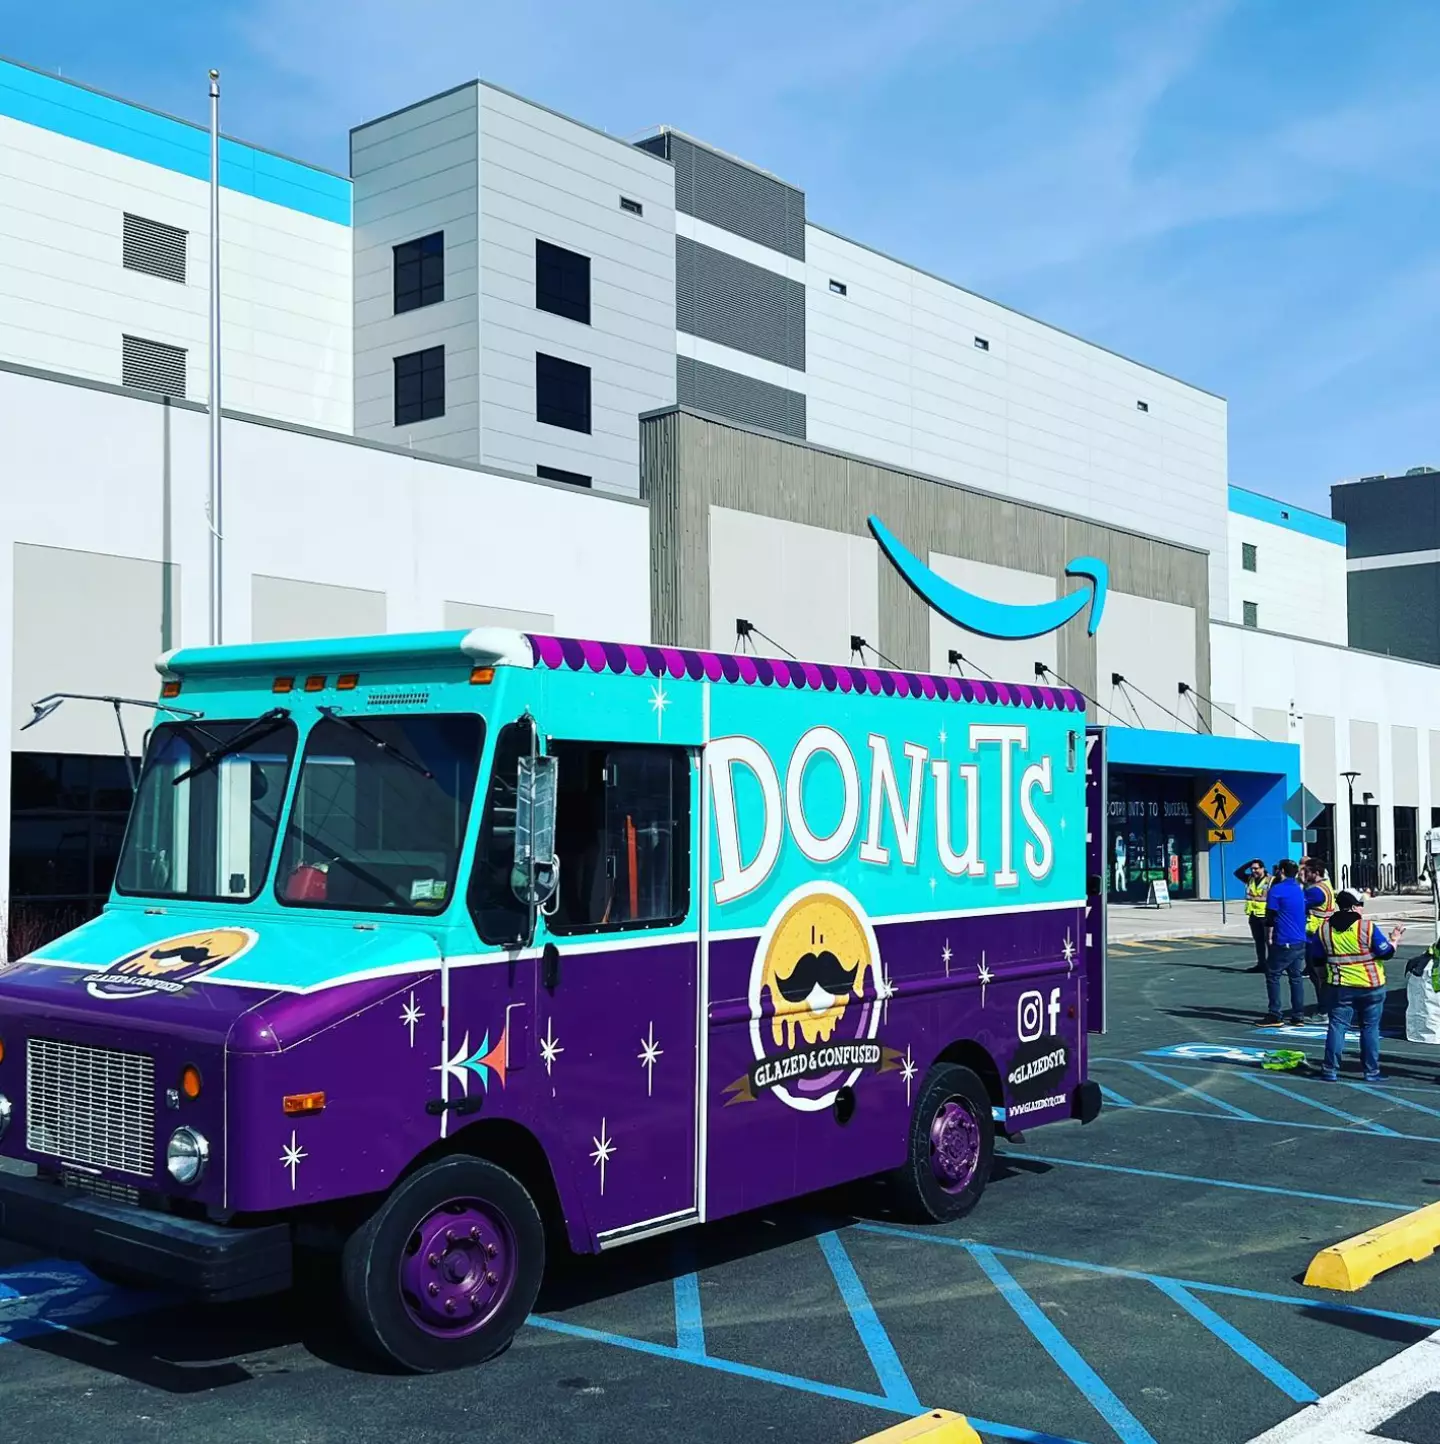 The famous Glazed and Confused donut truck was stolen this morning.